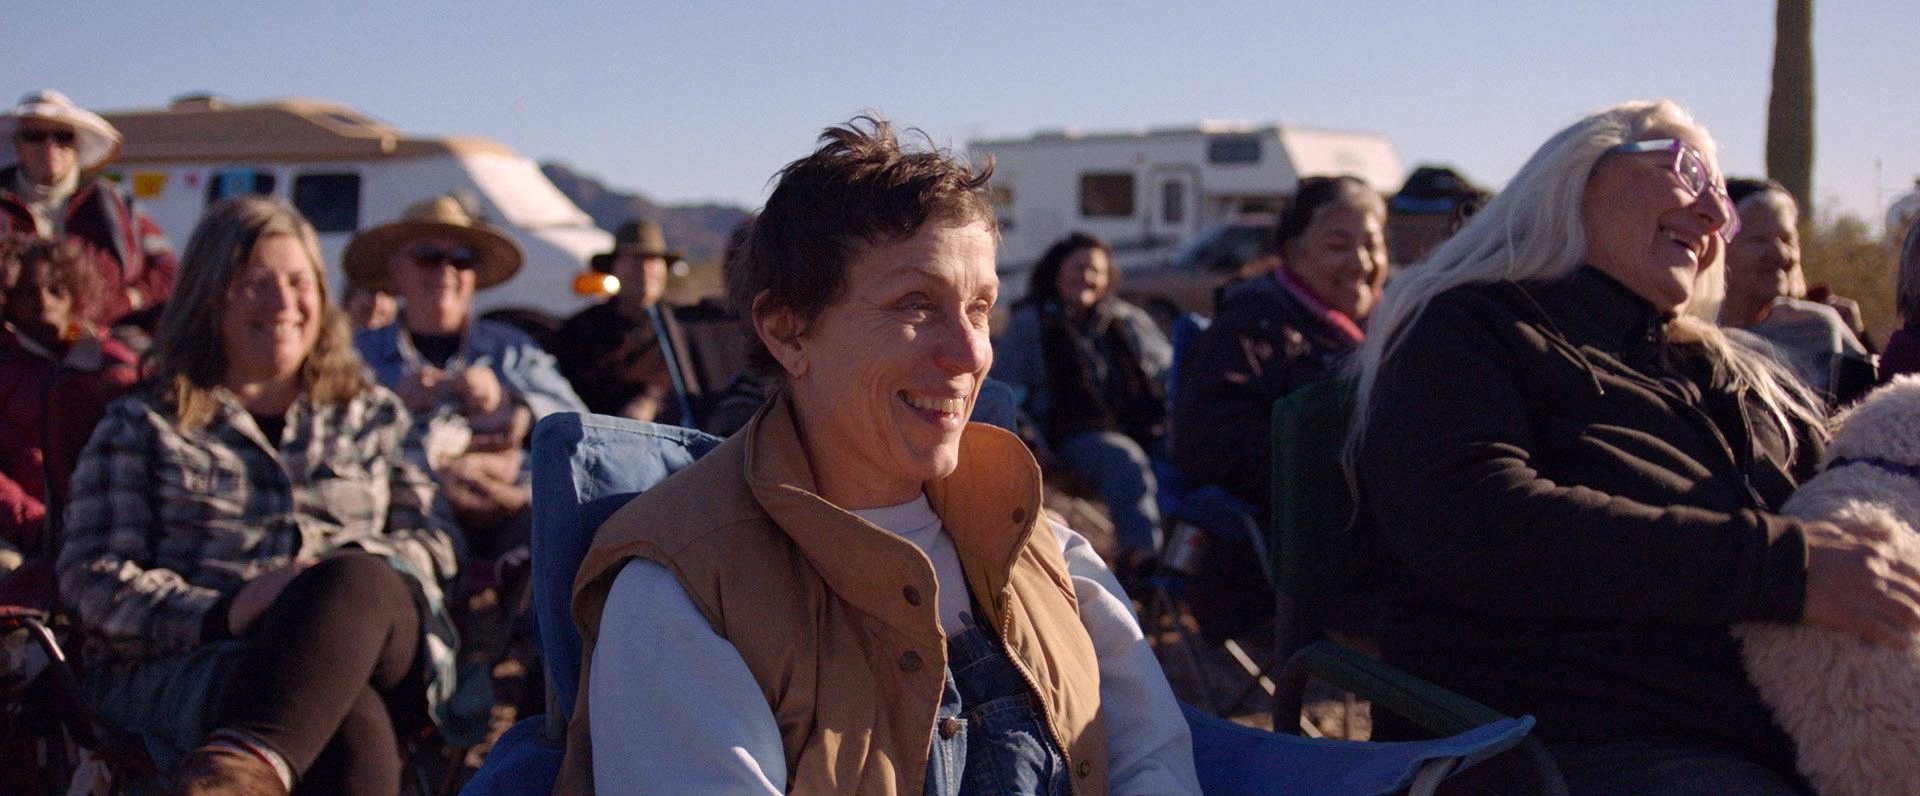 A still image from the film “Nomadland” shows Frances McDormand surrounded by a group of people. (Searchlight Pictures via AP)